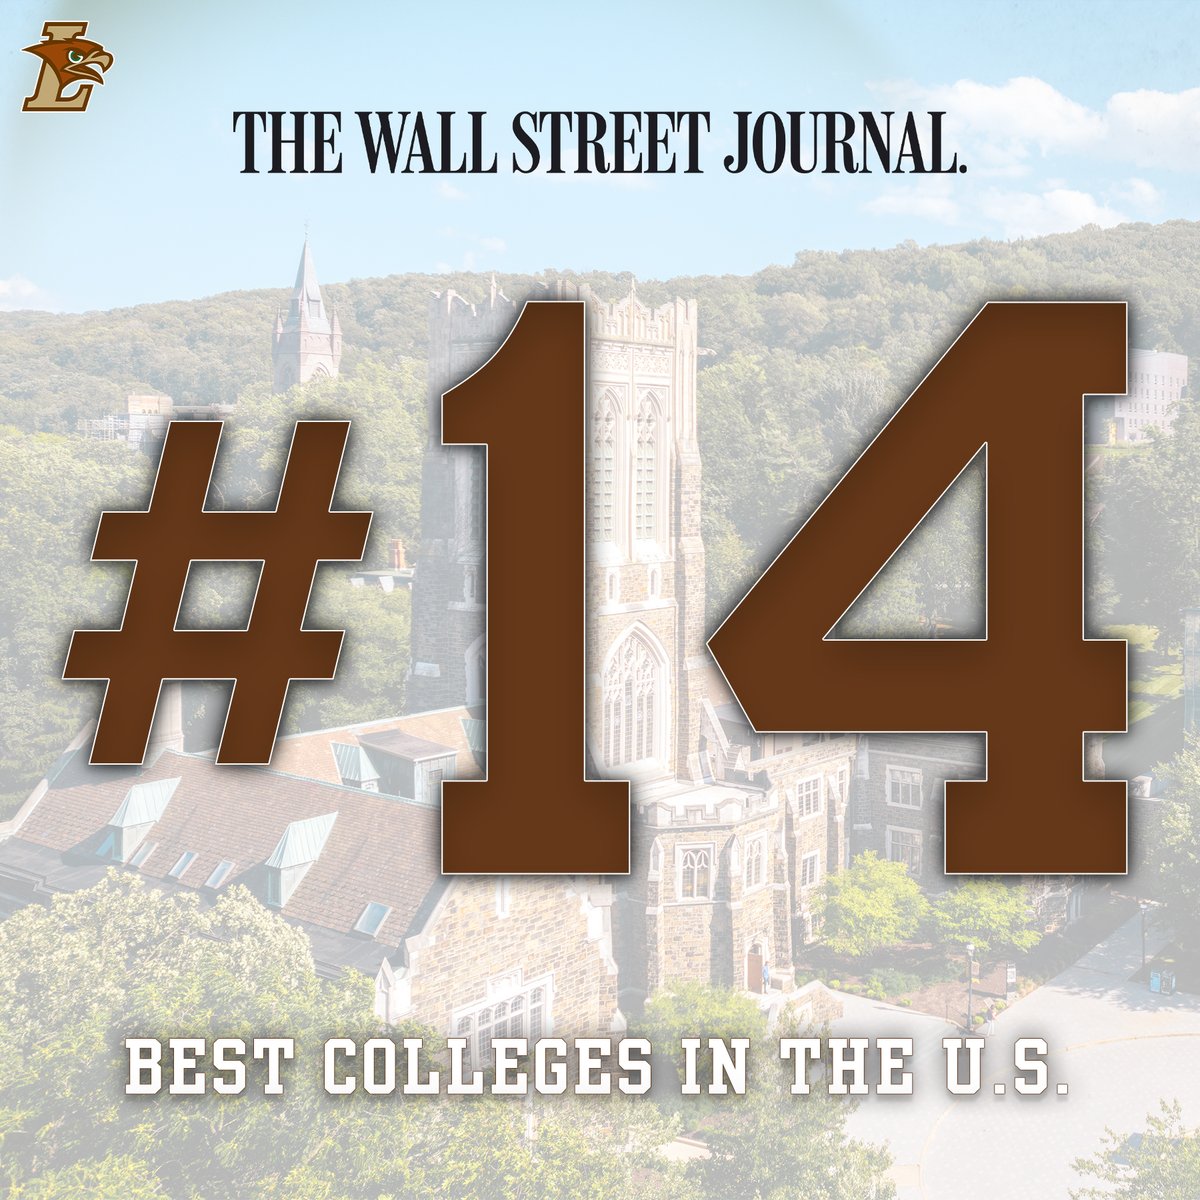 The @WSJ has spoken: FIRST in the Patriot League. ONLY Patriot League school in the top 25. BEST... come experience @LehighU for yourself! #GoLehigh